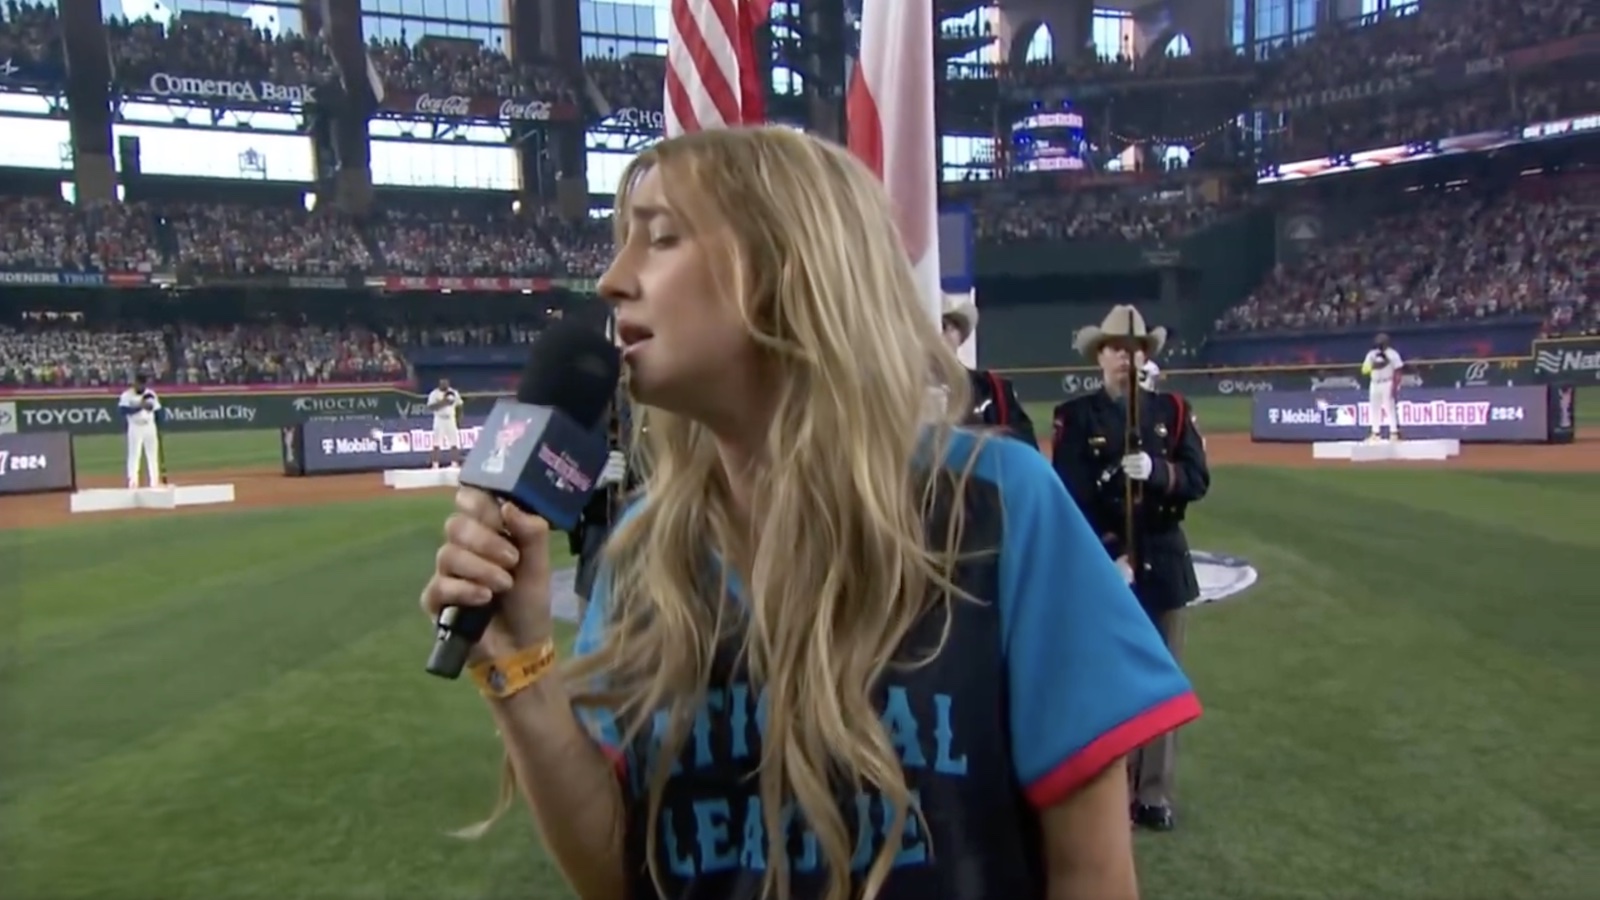 Fans react to the singer’s performance of the national anthem at the Home Run Derby